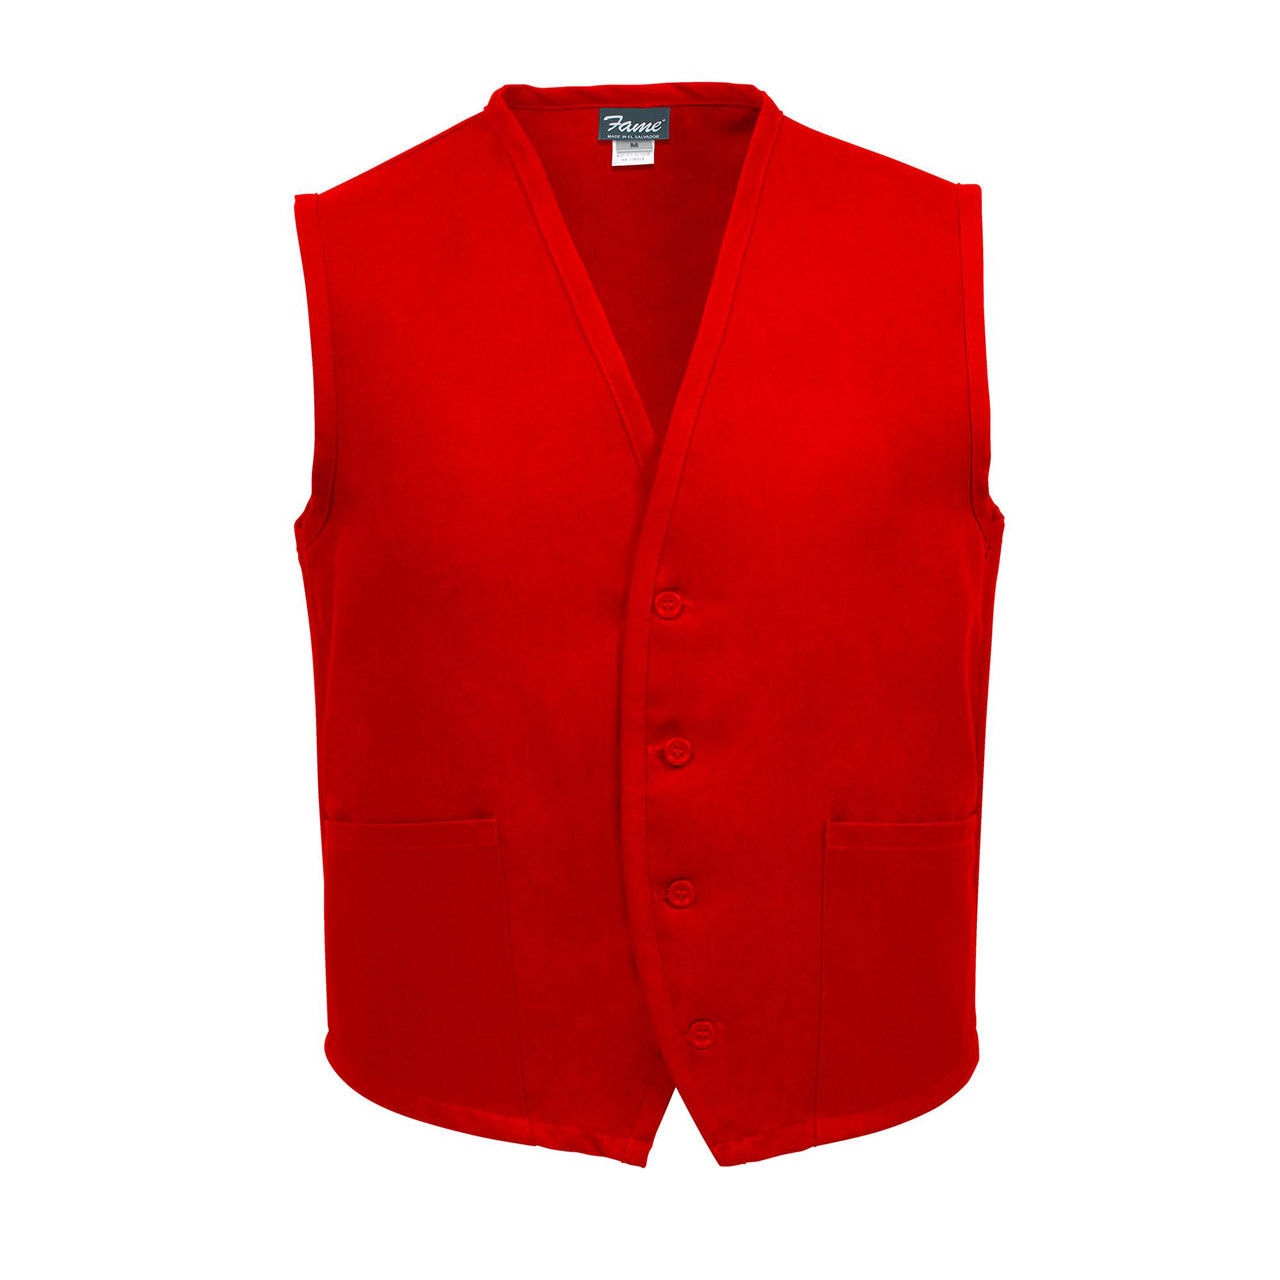 What is the closure style of the red vest in Unisex Uniform Vest, 2 Pocket?